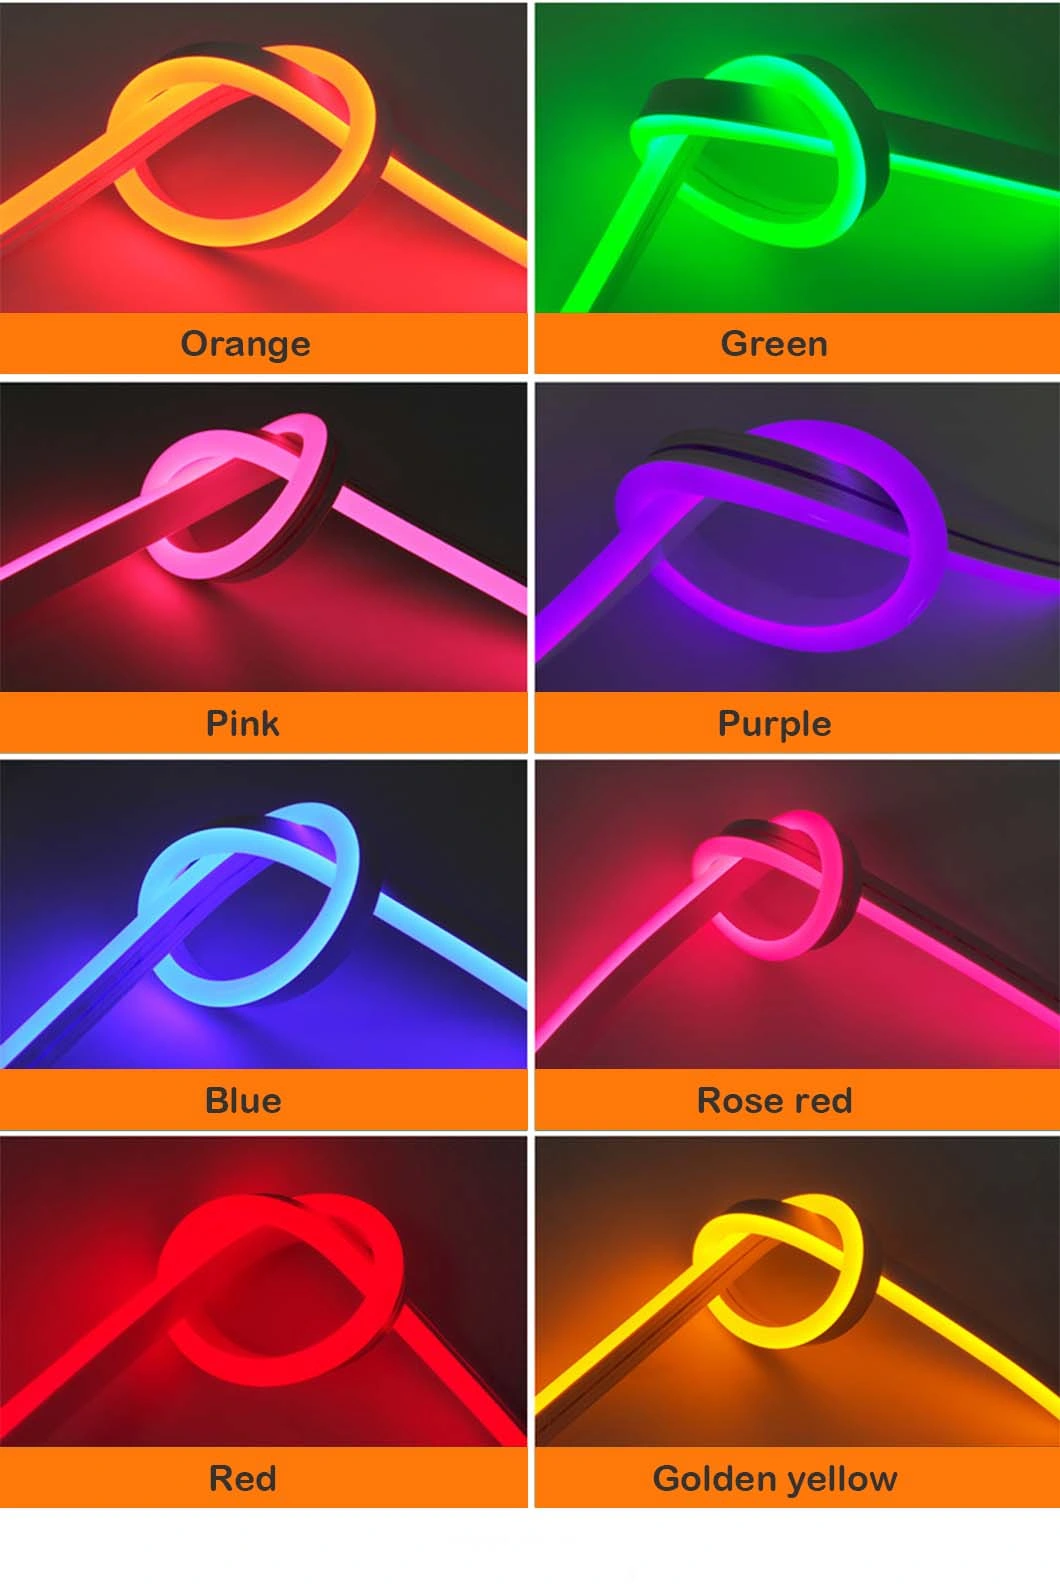 Slim Silicone Ultra Thin Waterproof Flexible Colorful LED Light Neon Strip